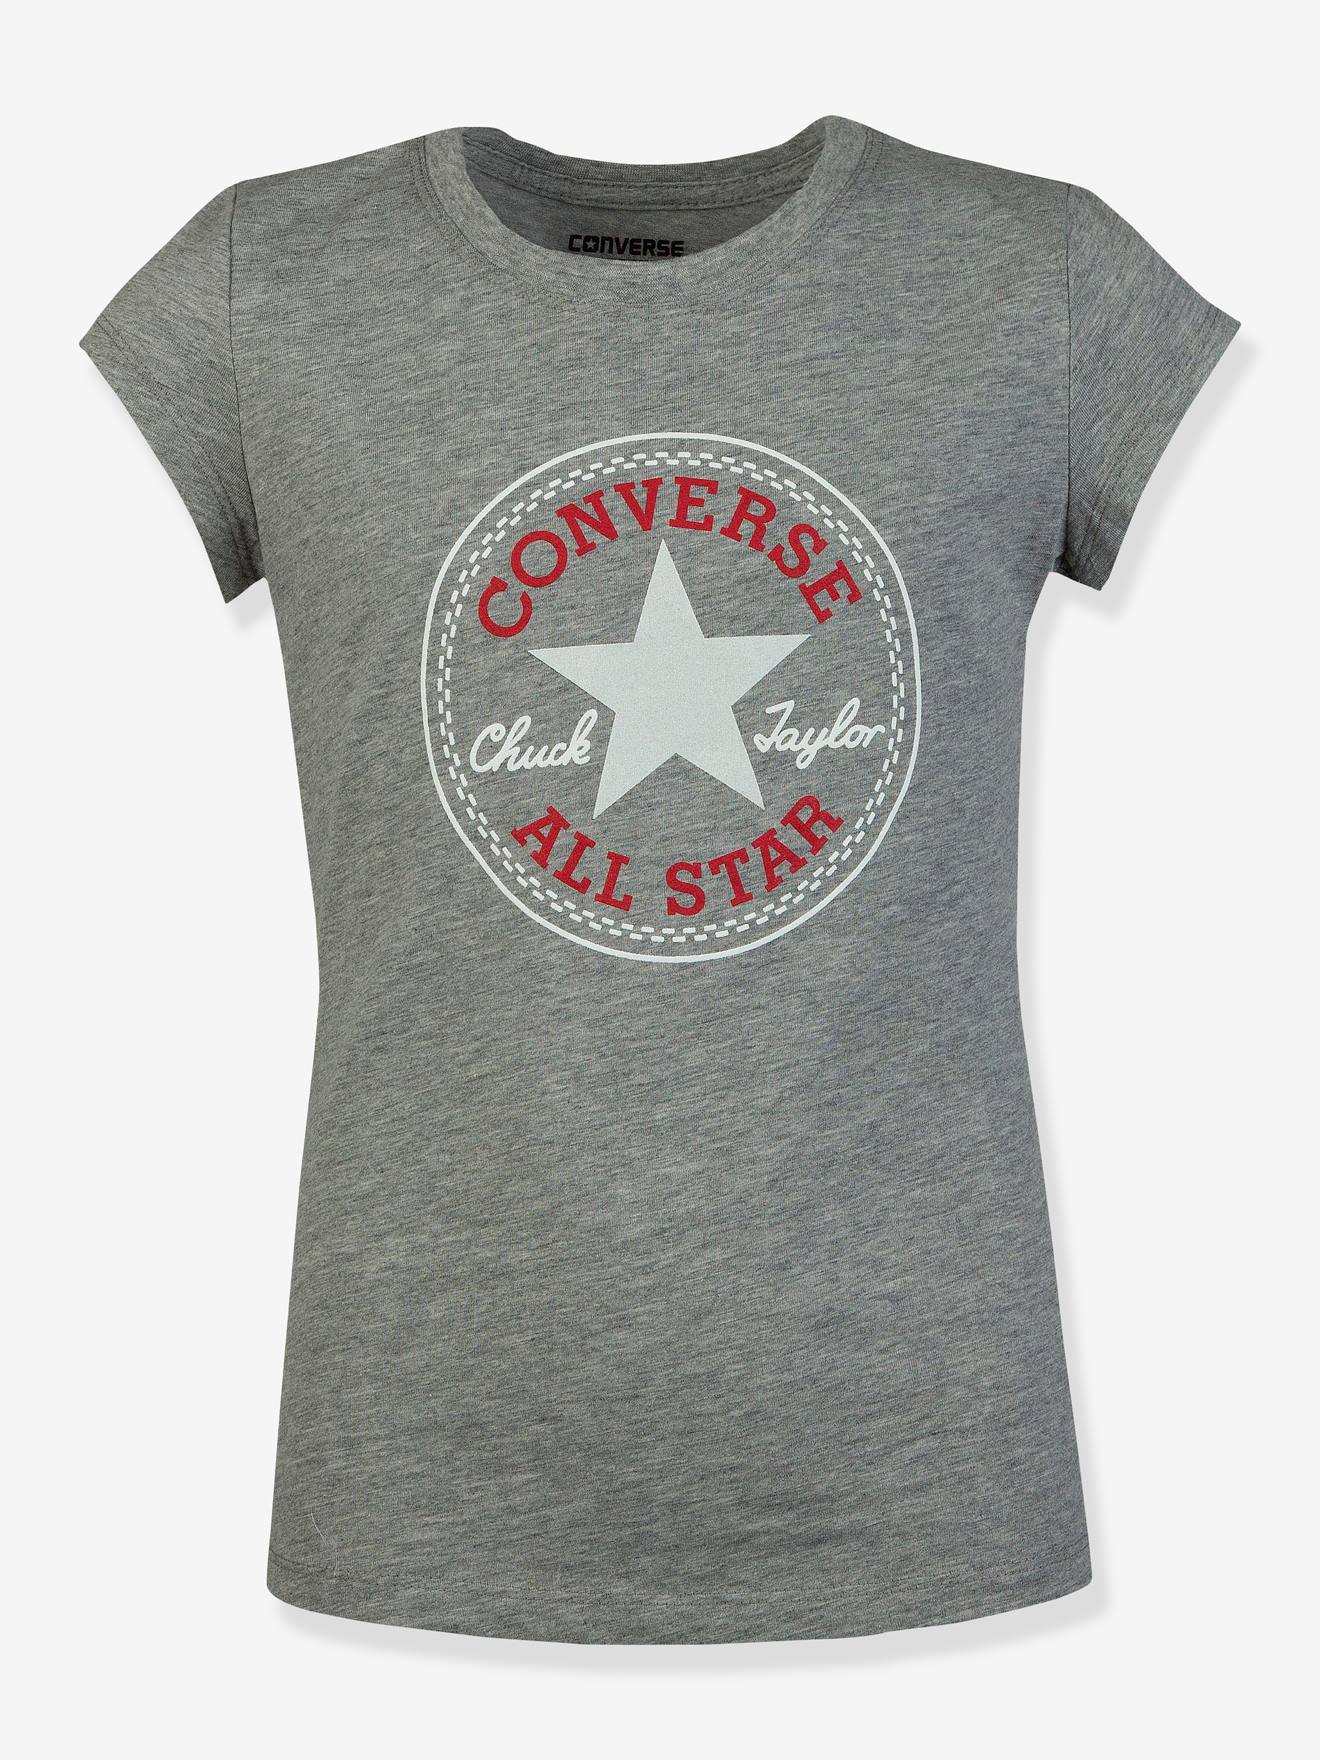 T-shirt for Children, Chuck Patch by CONVERSE grey